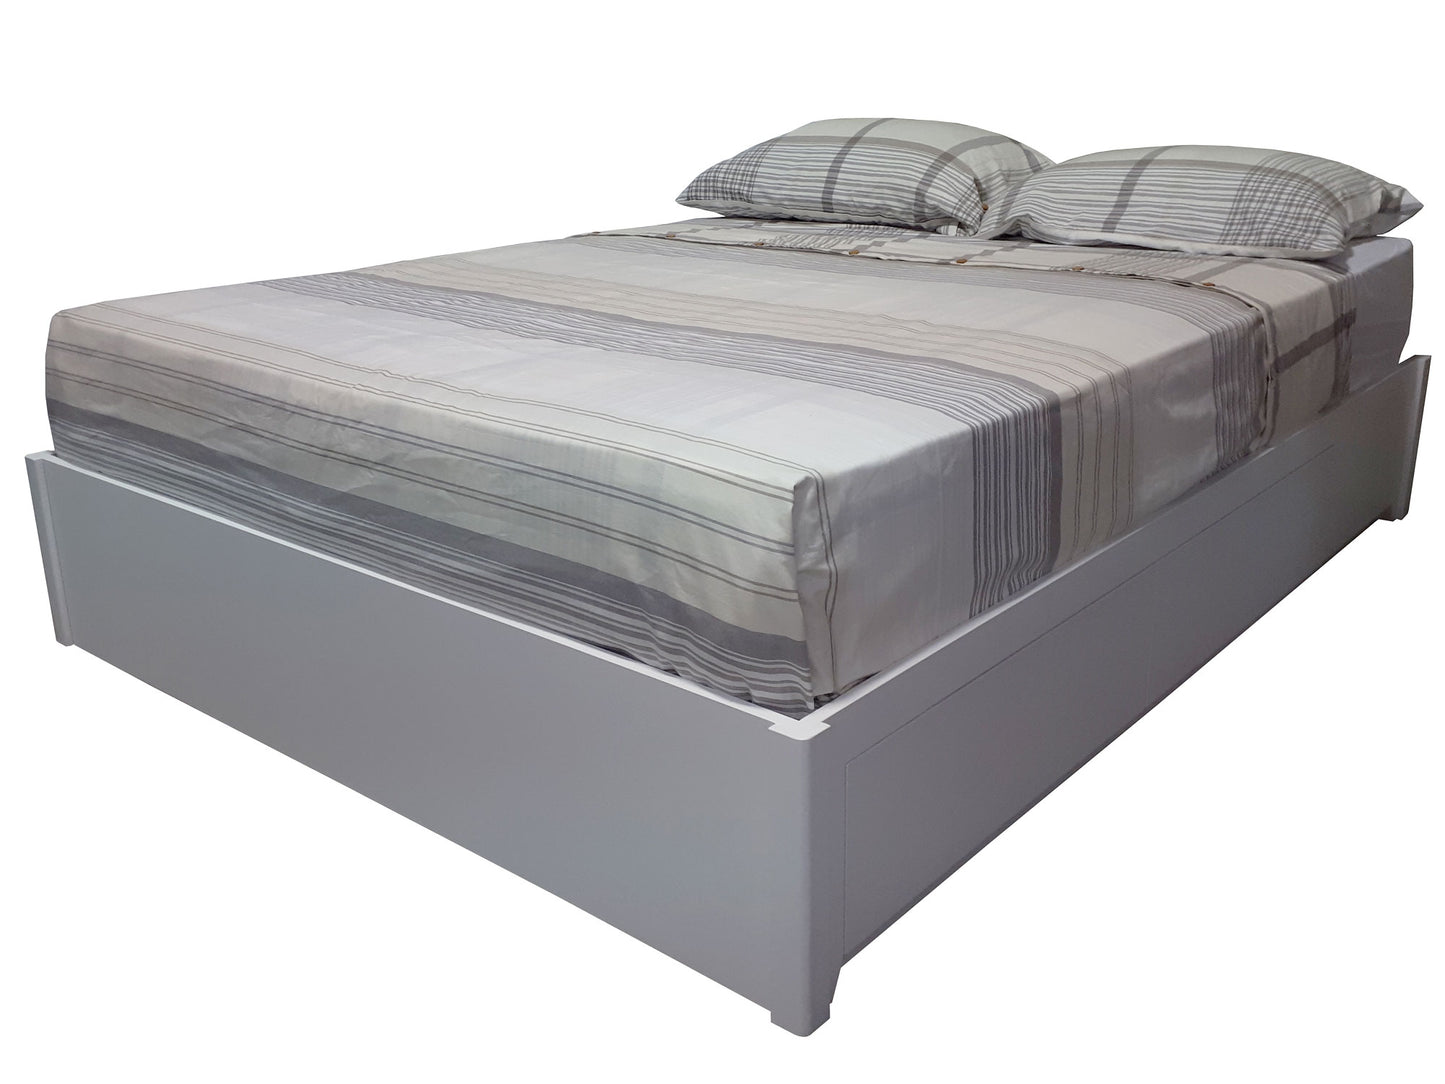 Dunbar Storage Bed, locally built, in-house design, Canadian made, custom made furniture